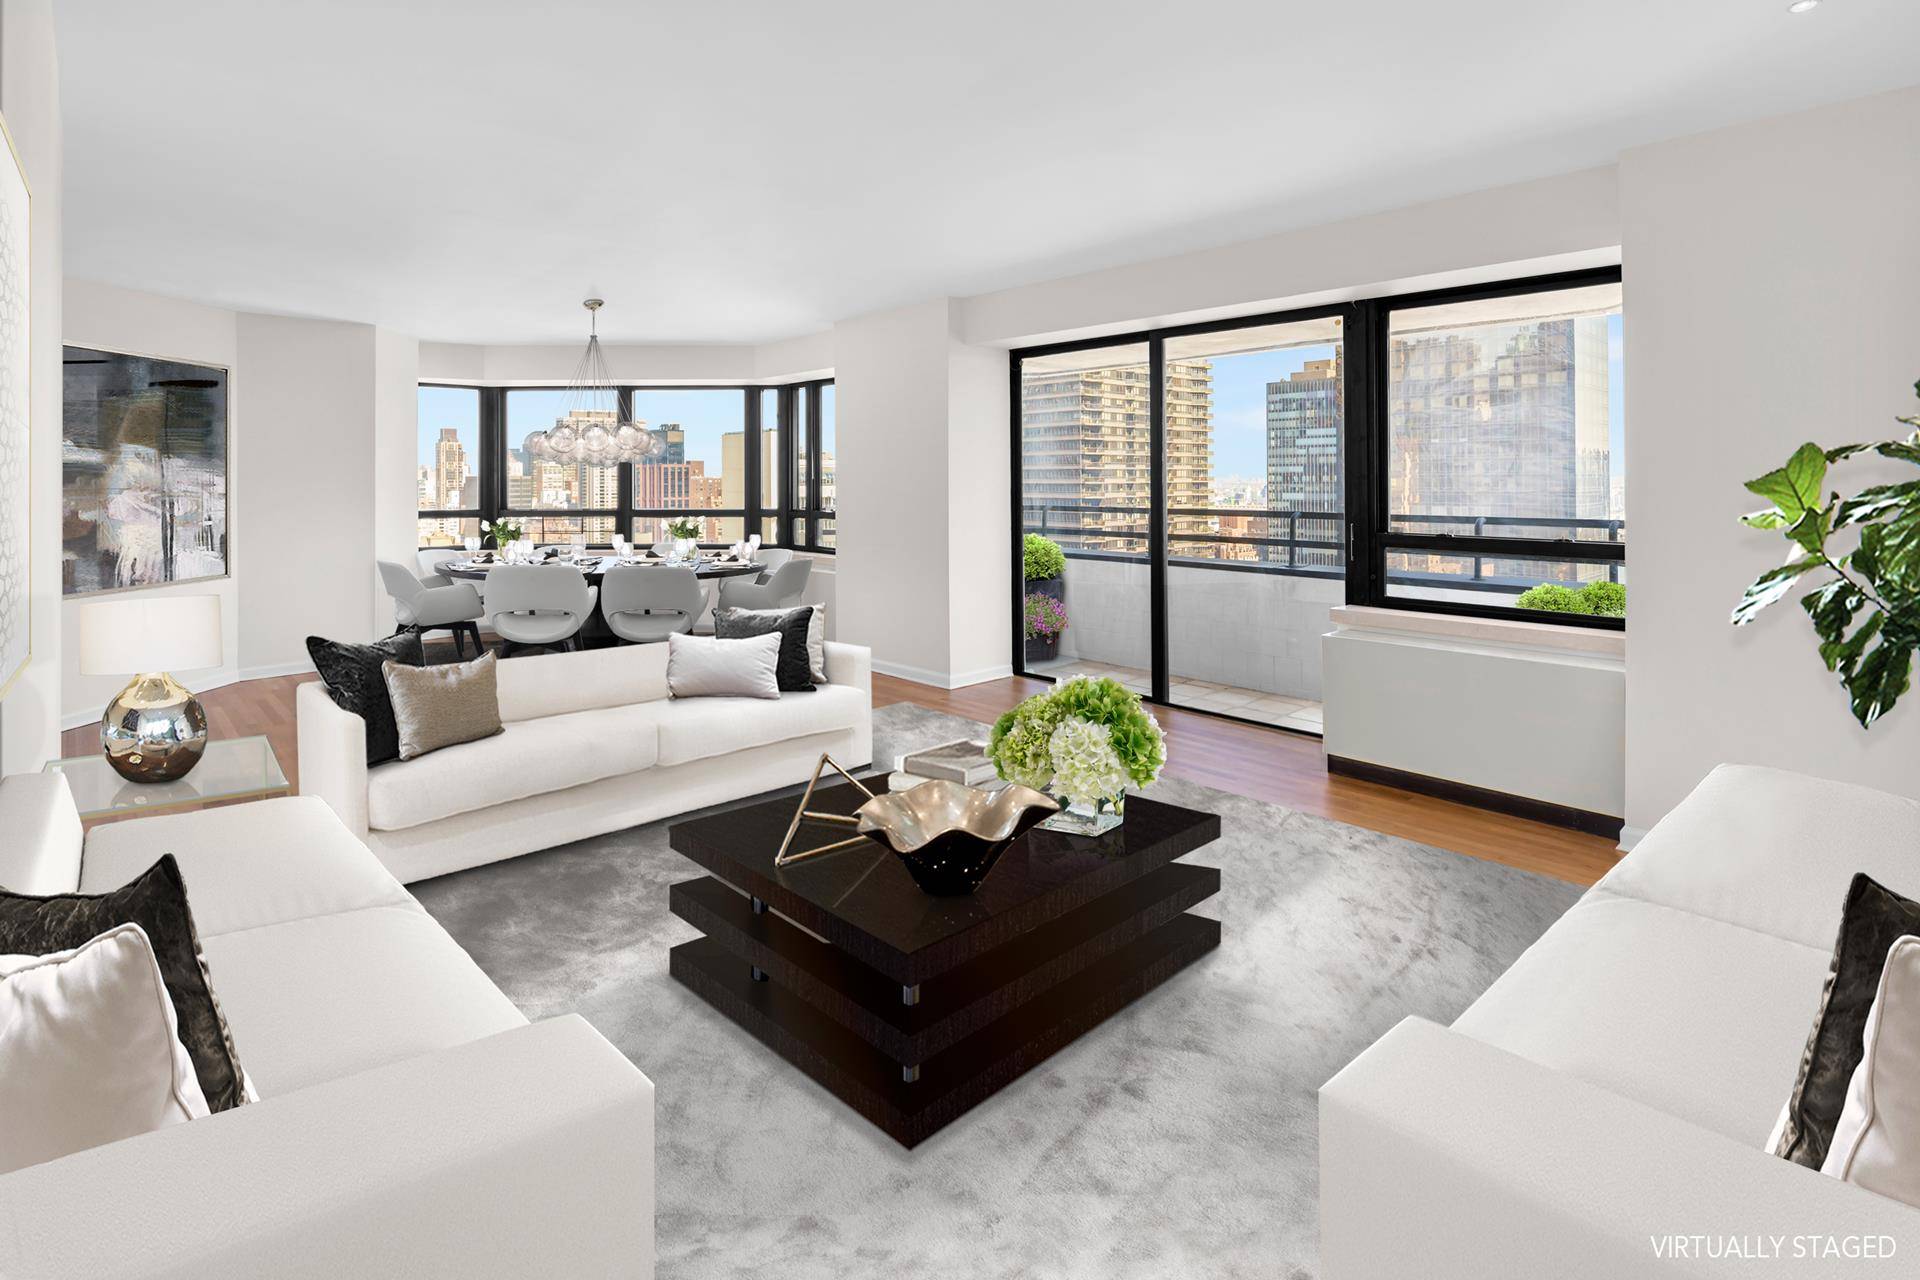 Enjoy sweeping East River and City views from this pristine home an oasis in the heart of midtown Manhattan.